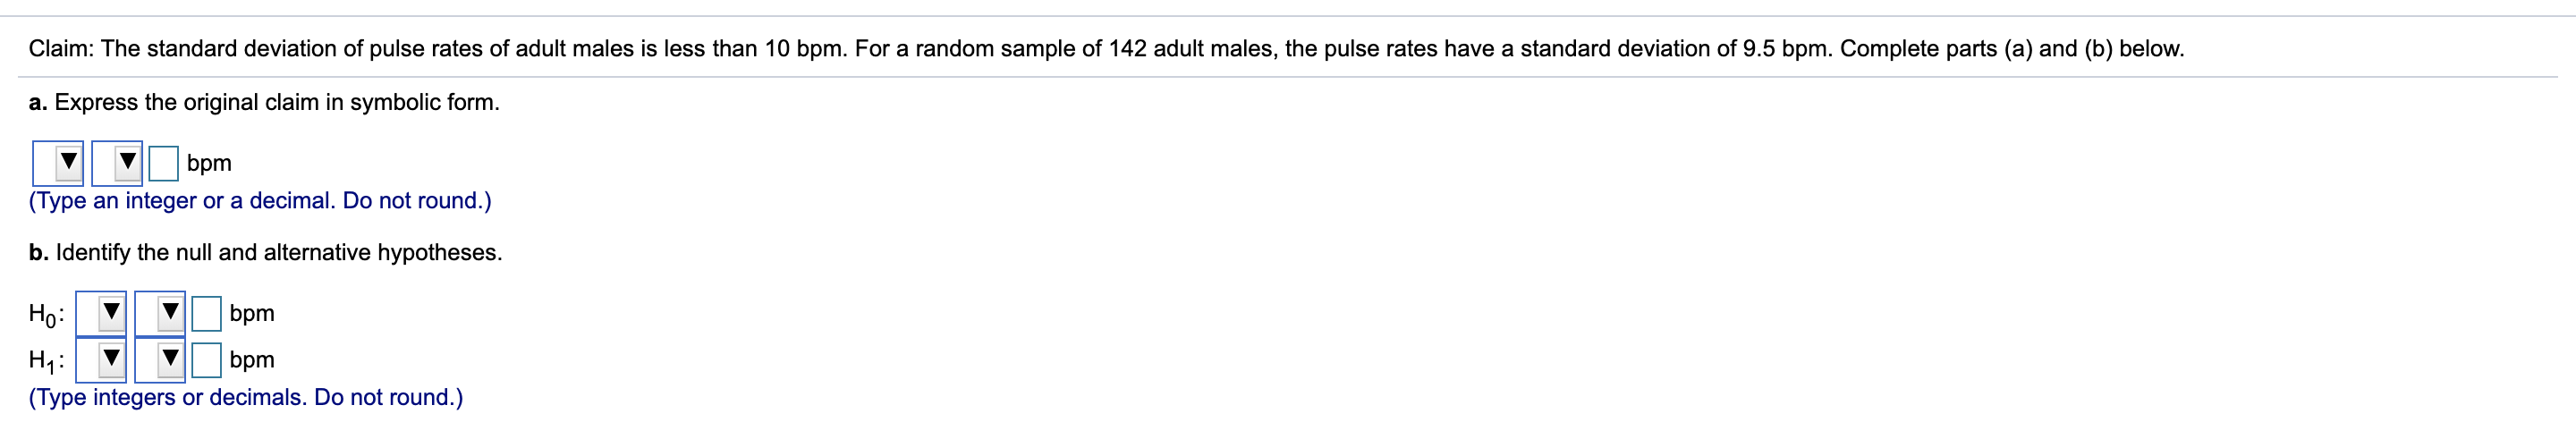 Claim: The standard deviation of pulse rates of adult males is less than 10 bpm. For a random sample of 142 adult males, the pulse rates have a standard deviation of 9.5 bpm. Complete parts (a) and (b) below.
a. Express the original claim in symbolic form.
bpm
(Type an integer or a decimal. Do not round.)
b. Identify the null and alternative hypotheses.
Họ:
bpm
Нu:
bpm
(Type integers or decimals. Do not round.)
